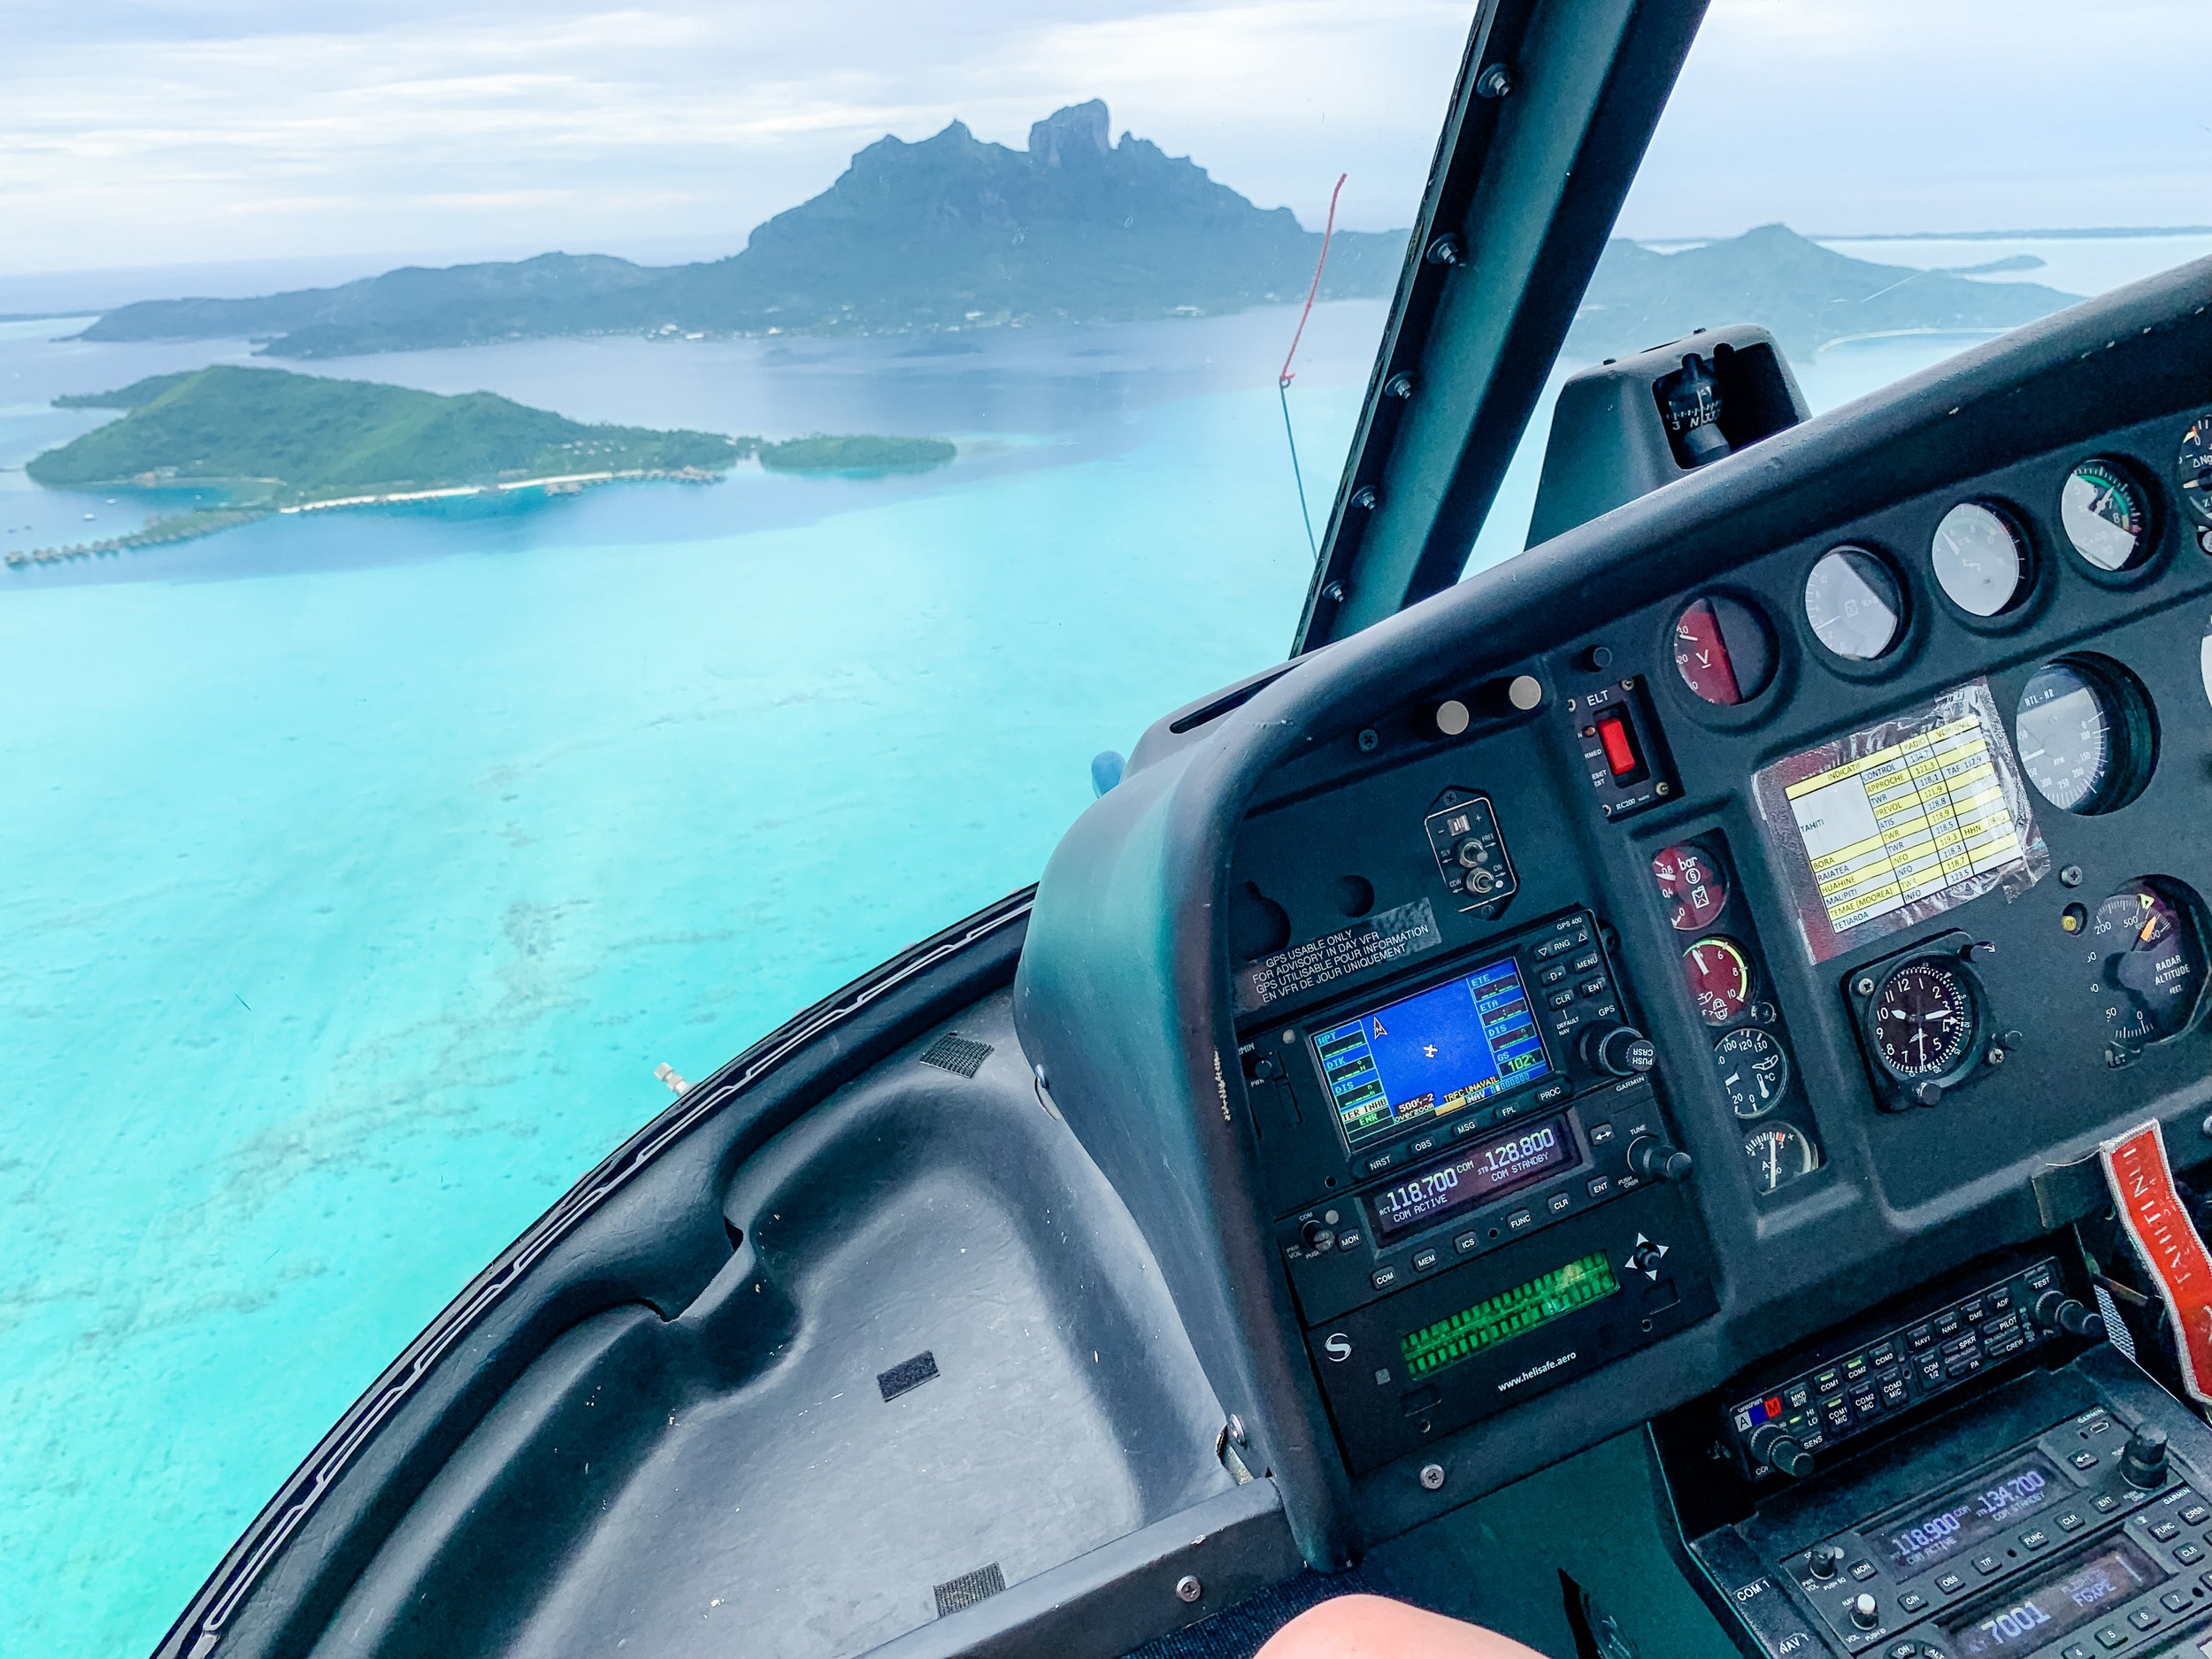 Helicopter tour over Bora Bora, the overwater bungalows, Mt Otemanu, and motus